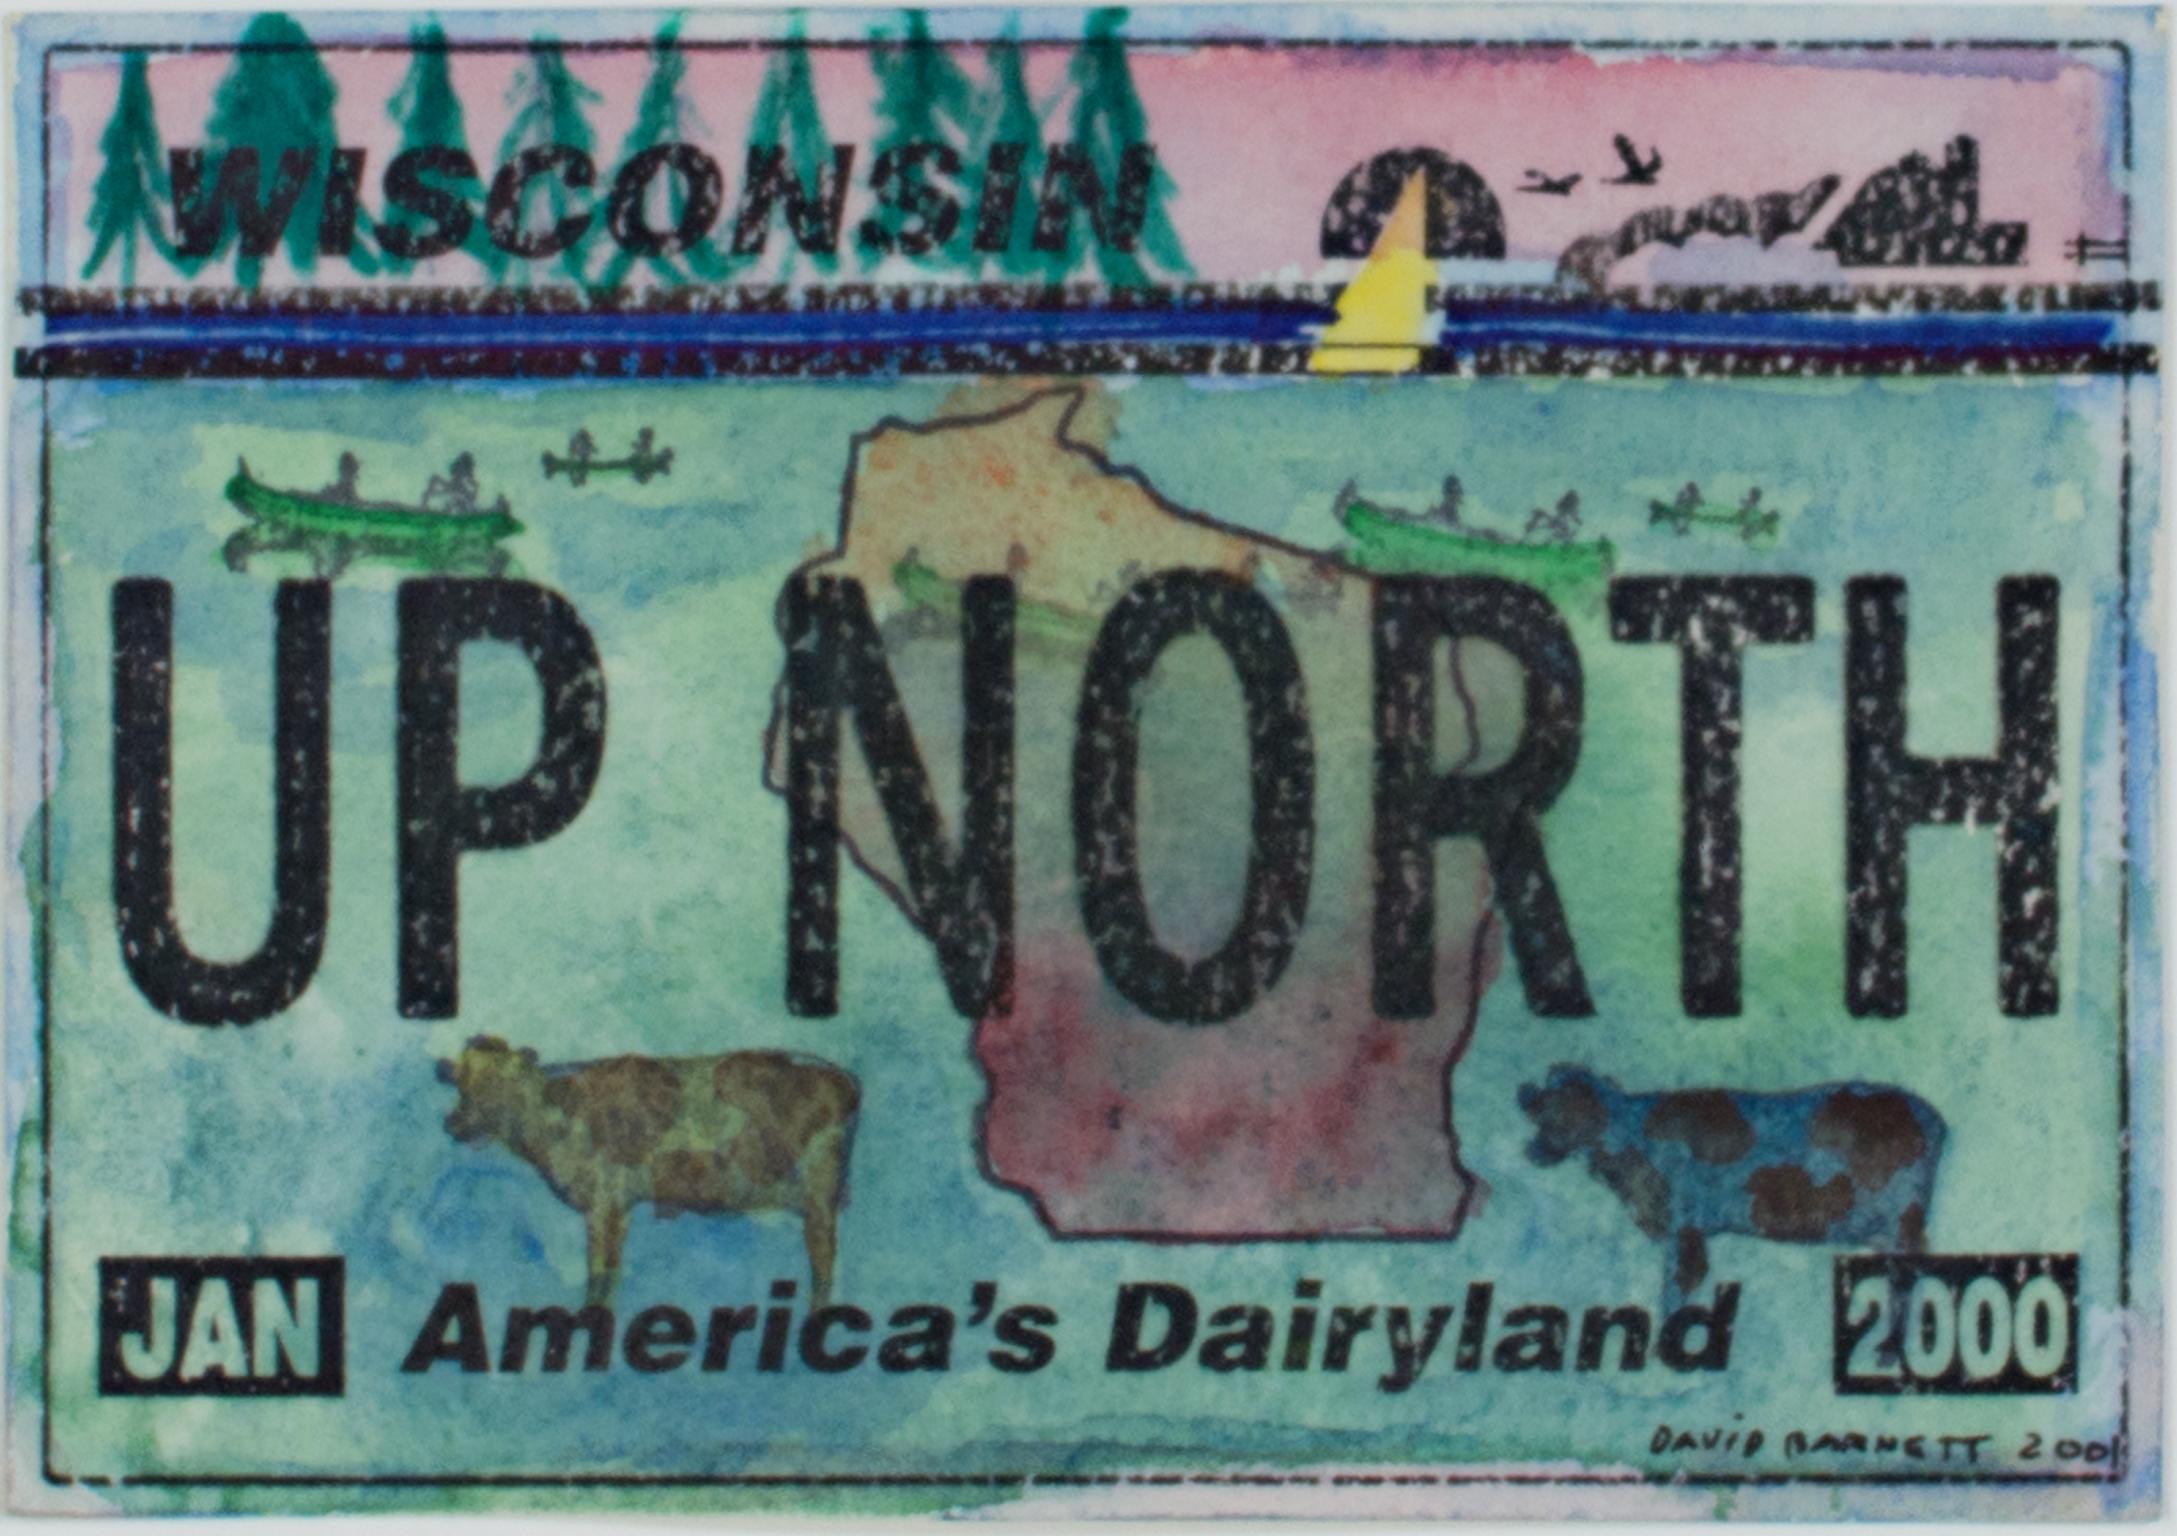 "Up North Wisconsin Series: Two Cows with Canoeists" is an original mixed-media piece by David Barnett that features watercolor, ink, and rubber stamps. The piece features a stamp of a Wisconsin license plate that reads "UP NORTH." In the